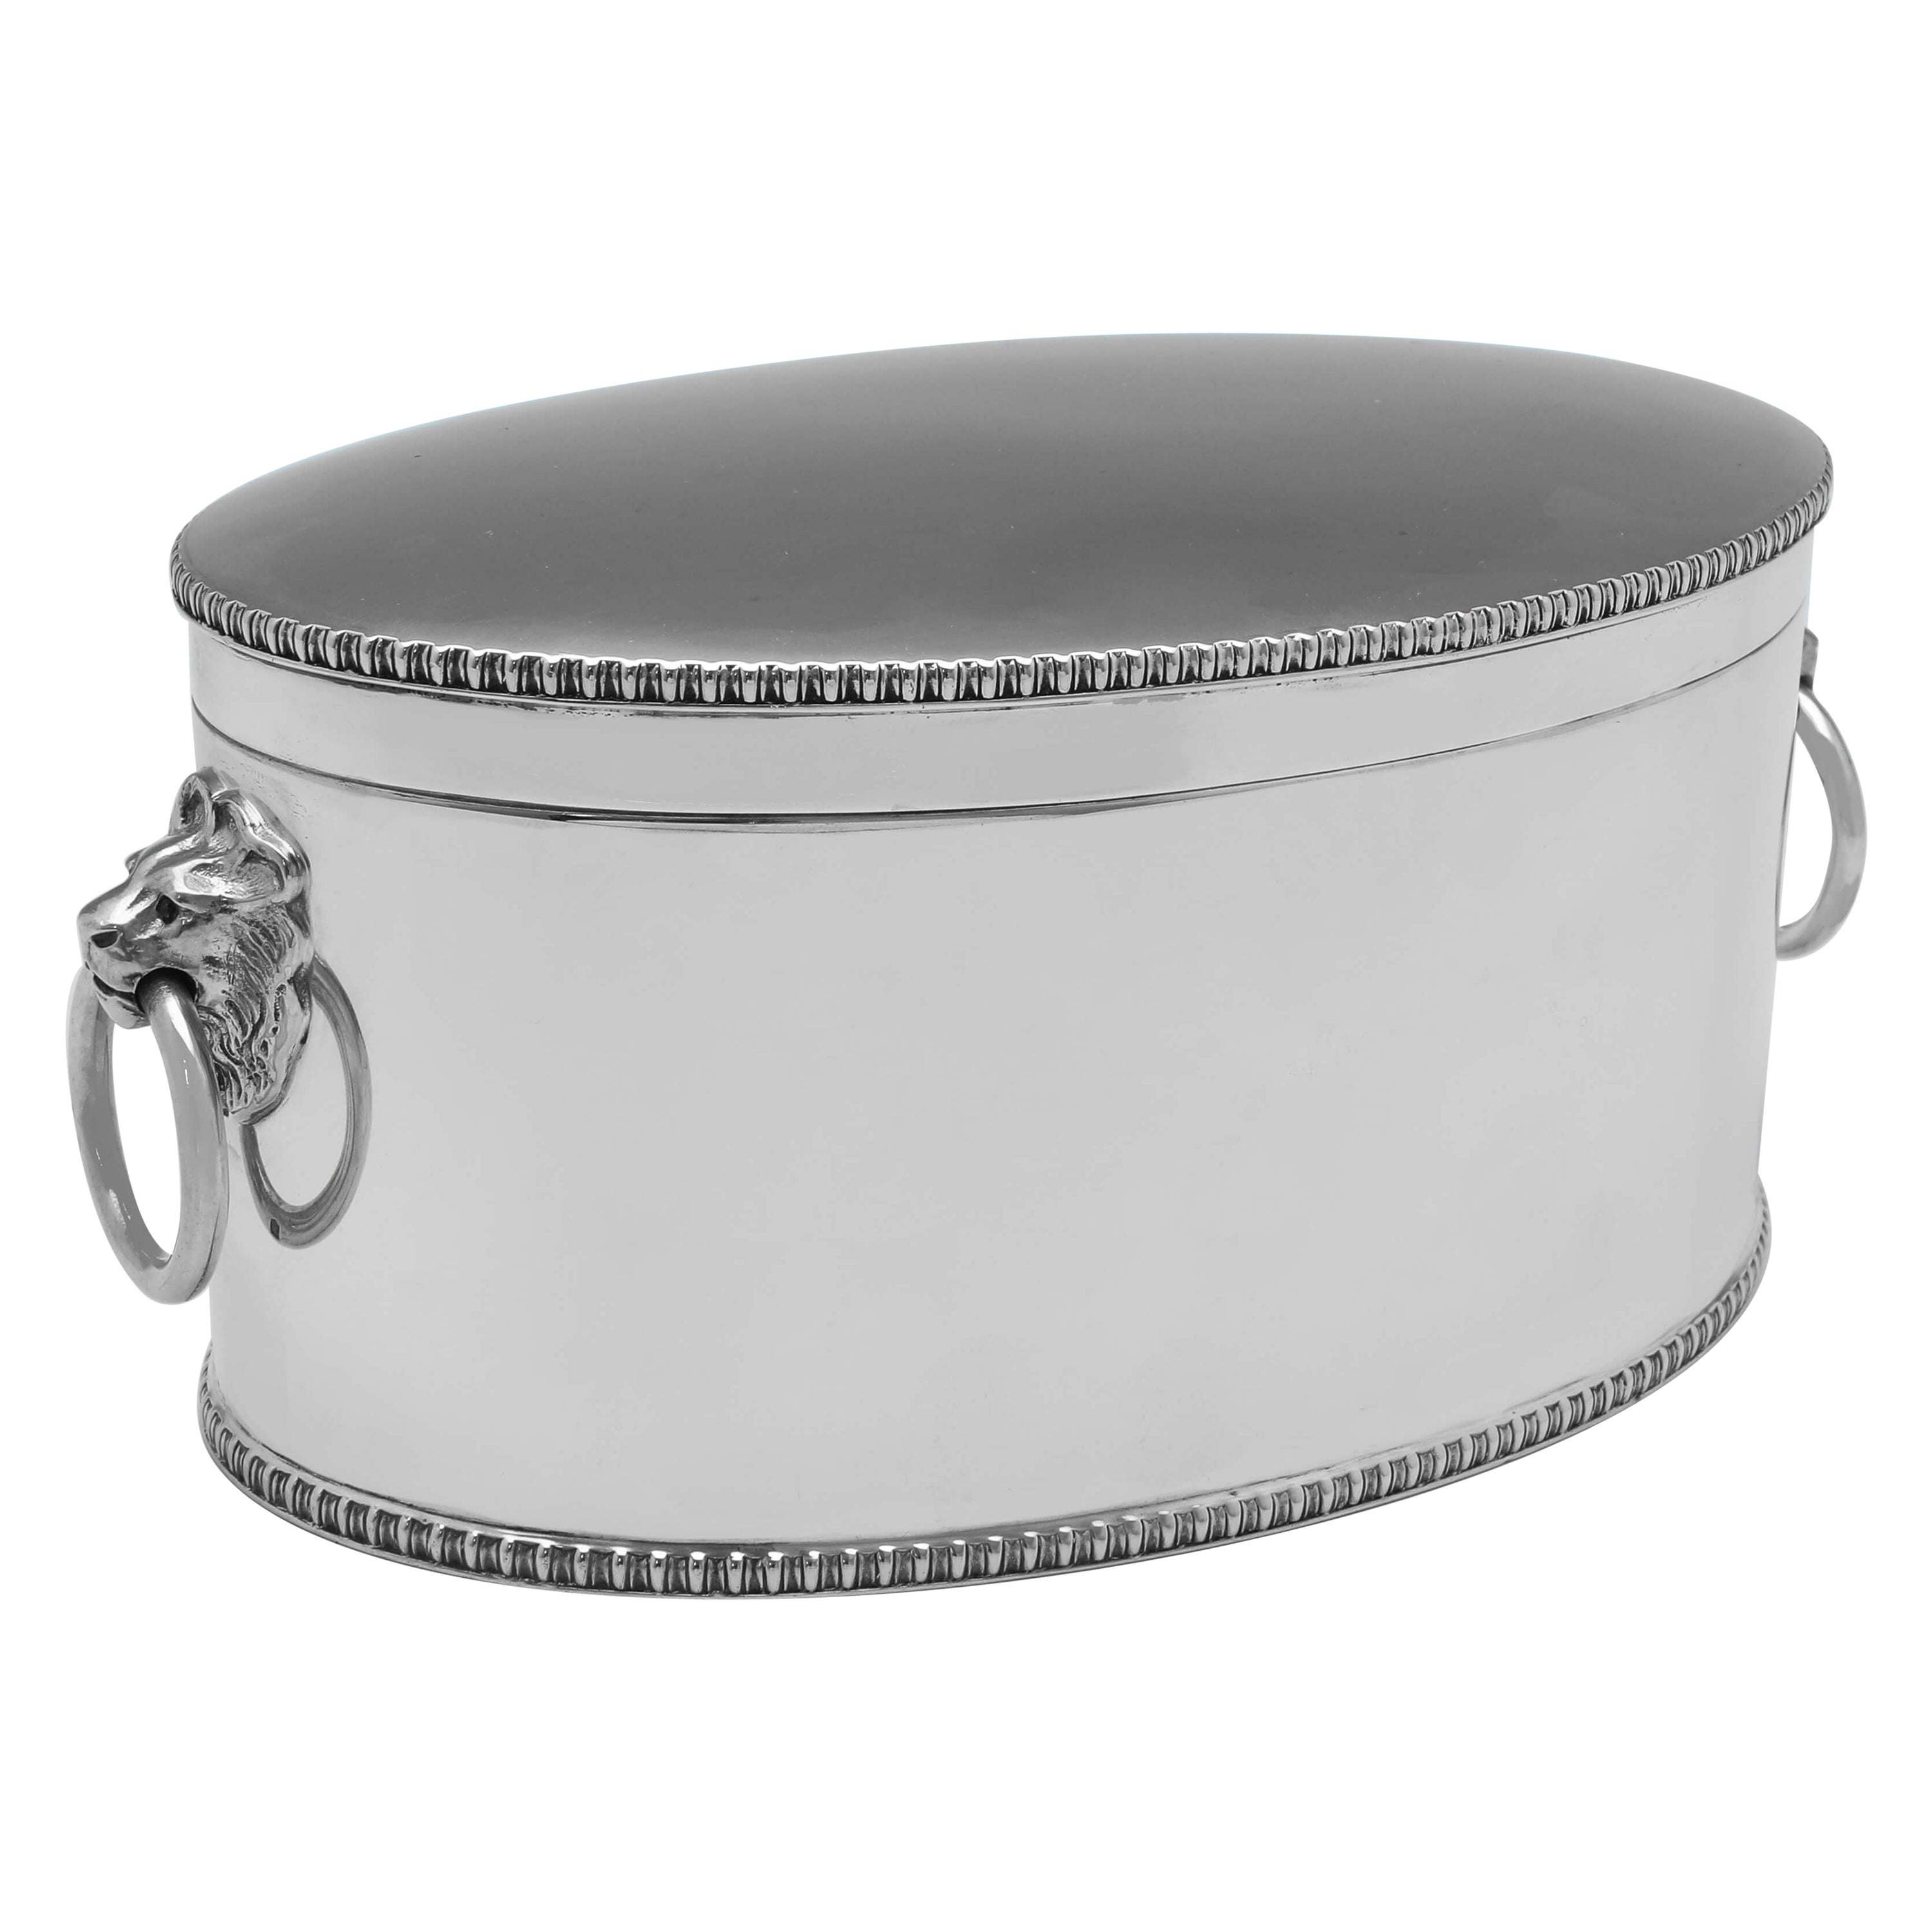 Art Deco Period Atkin Brothers Oval Sterling Silver Biscuit Box - Sheffield 1930 For Sale